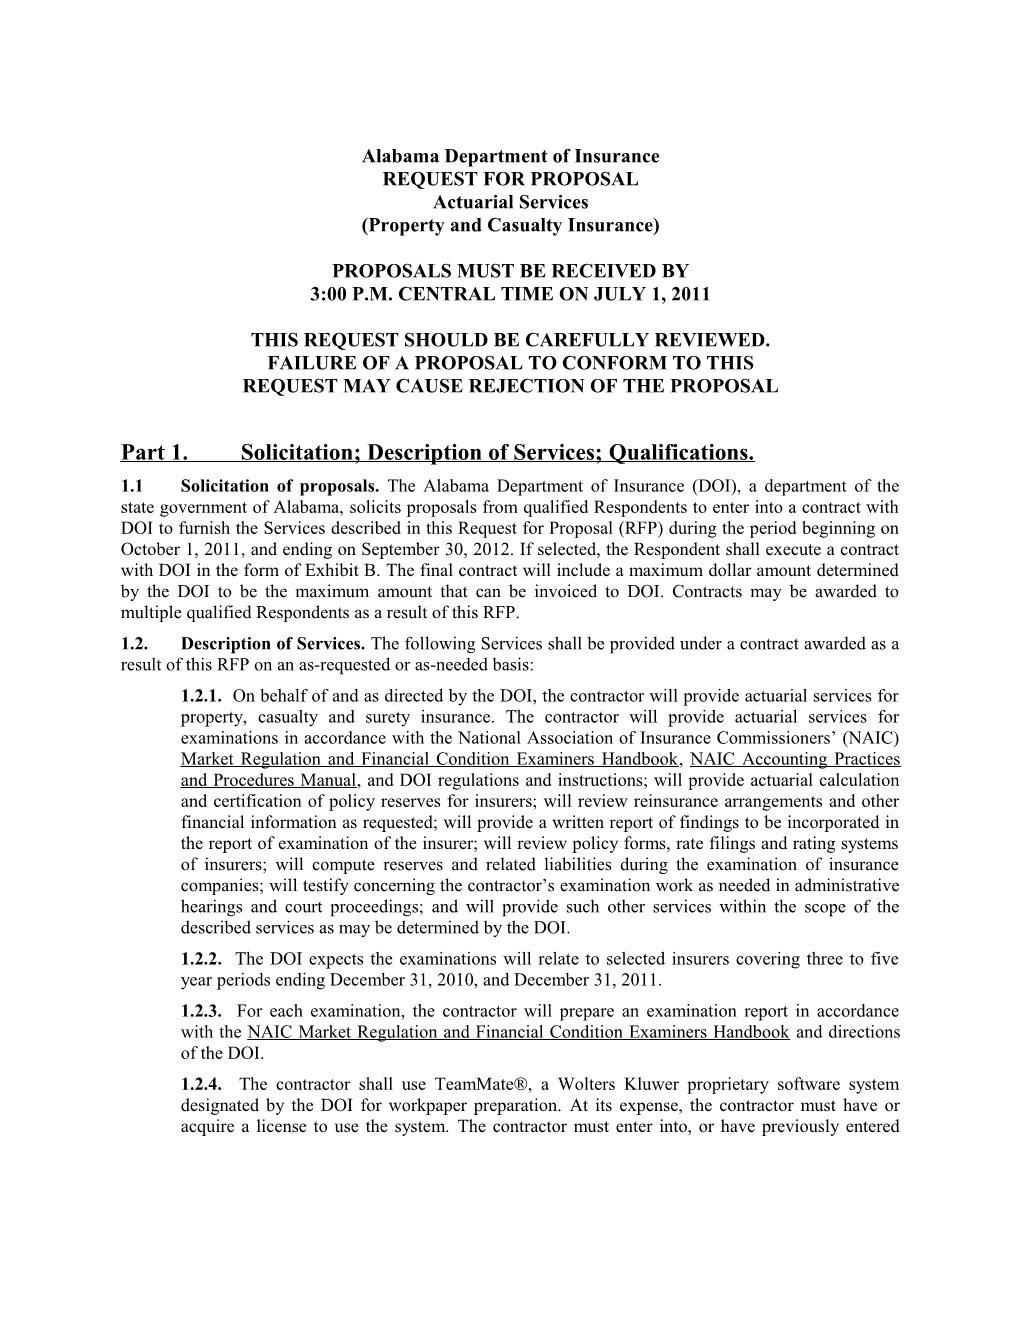 2011 ALDOI RFP for Property and Casualty Actuarial Services